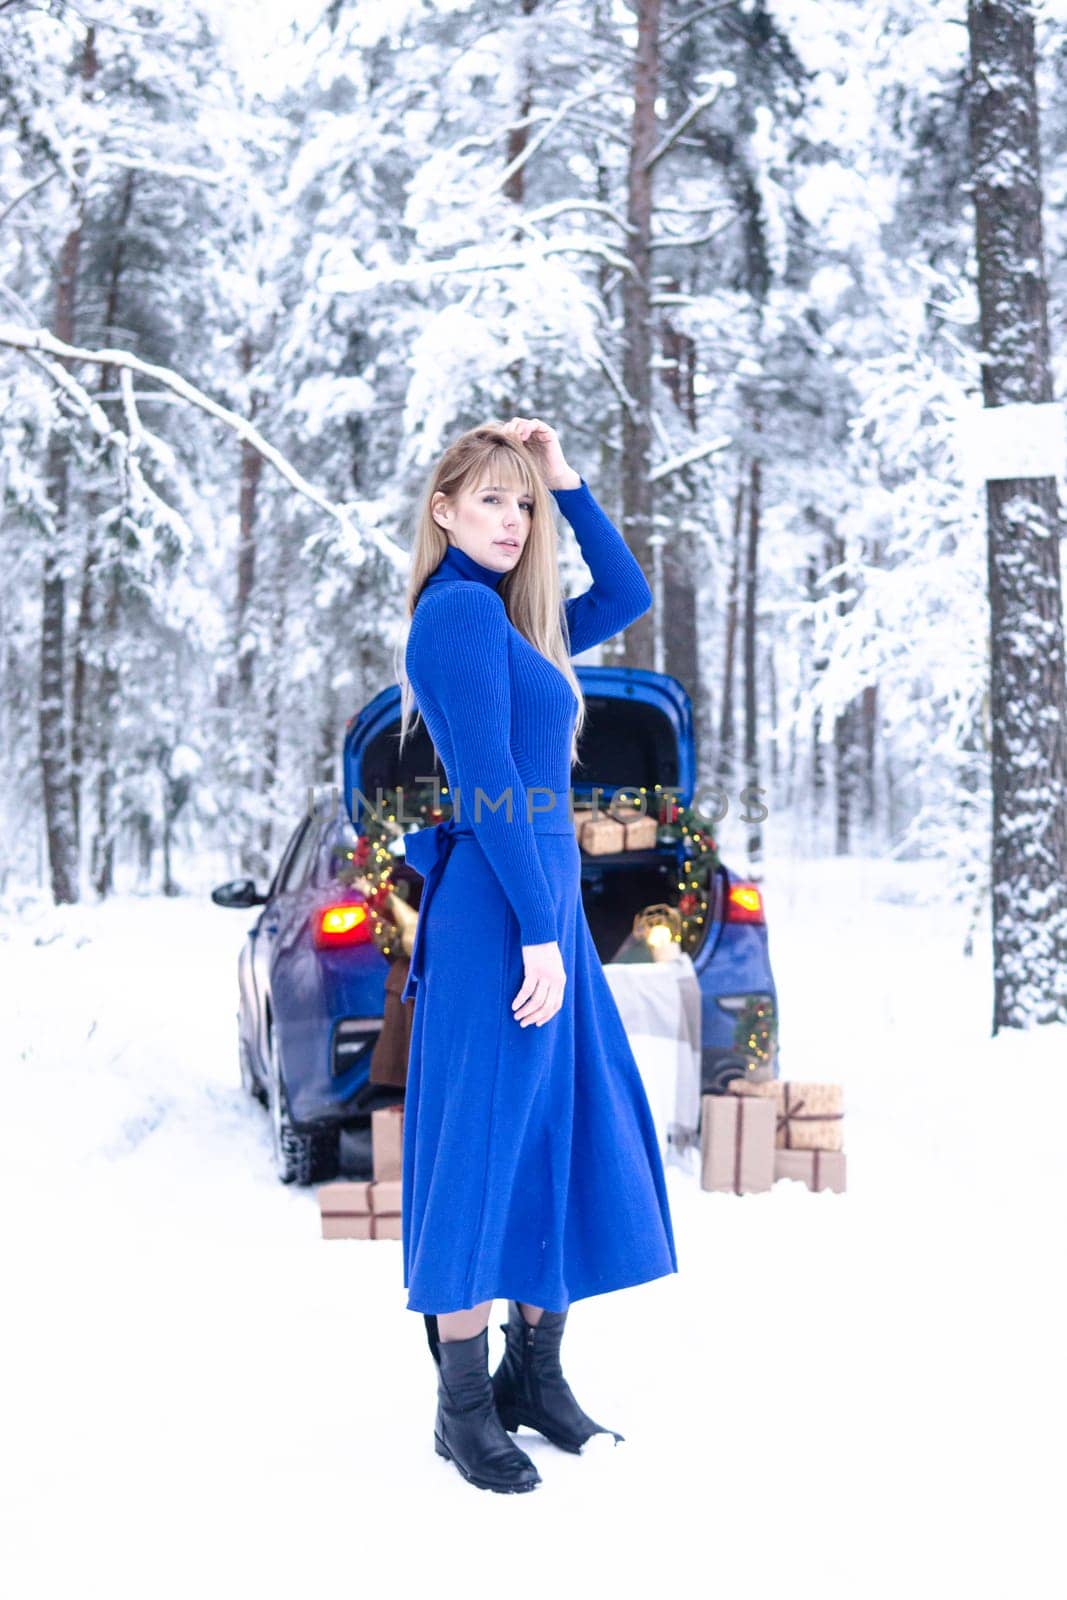 Woman in winter snowy forest in blue dress next to blue car decorated with Christmas decor. Christmas and winter holidays concept. by Annu1tochka